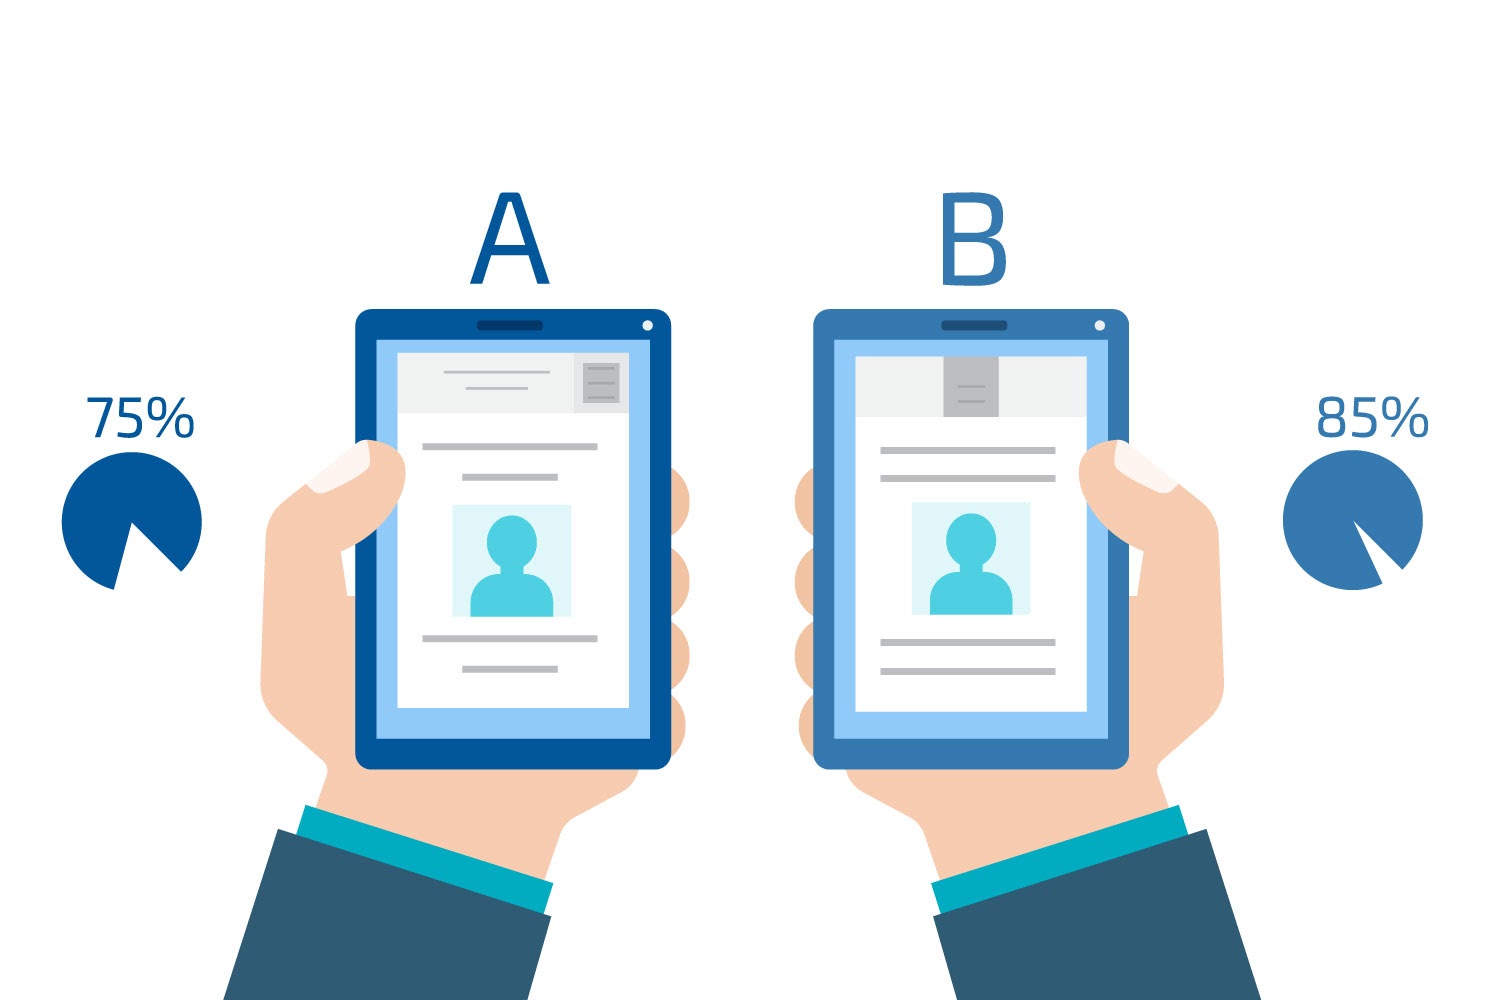 A vector illustration showing an A-B comparison between experiences on two different devices.